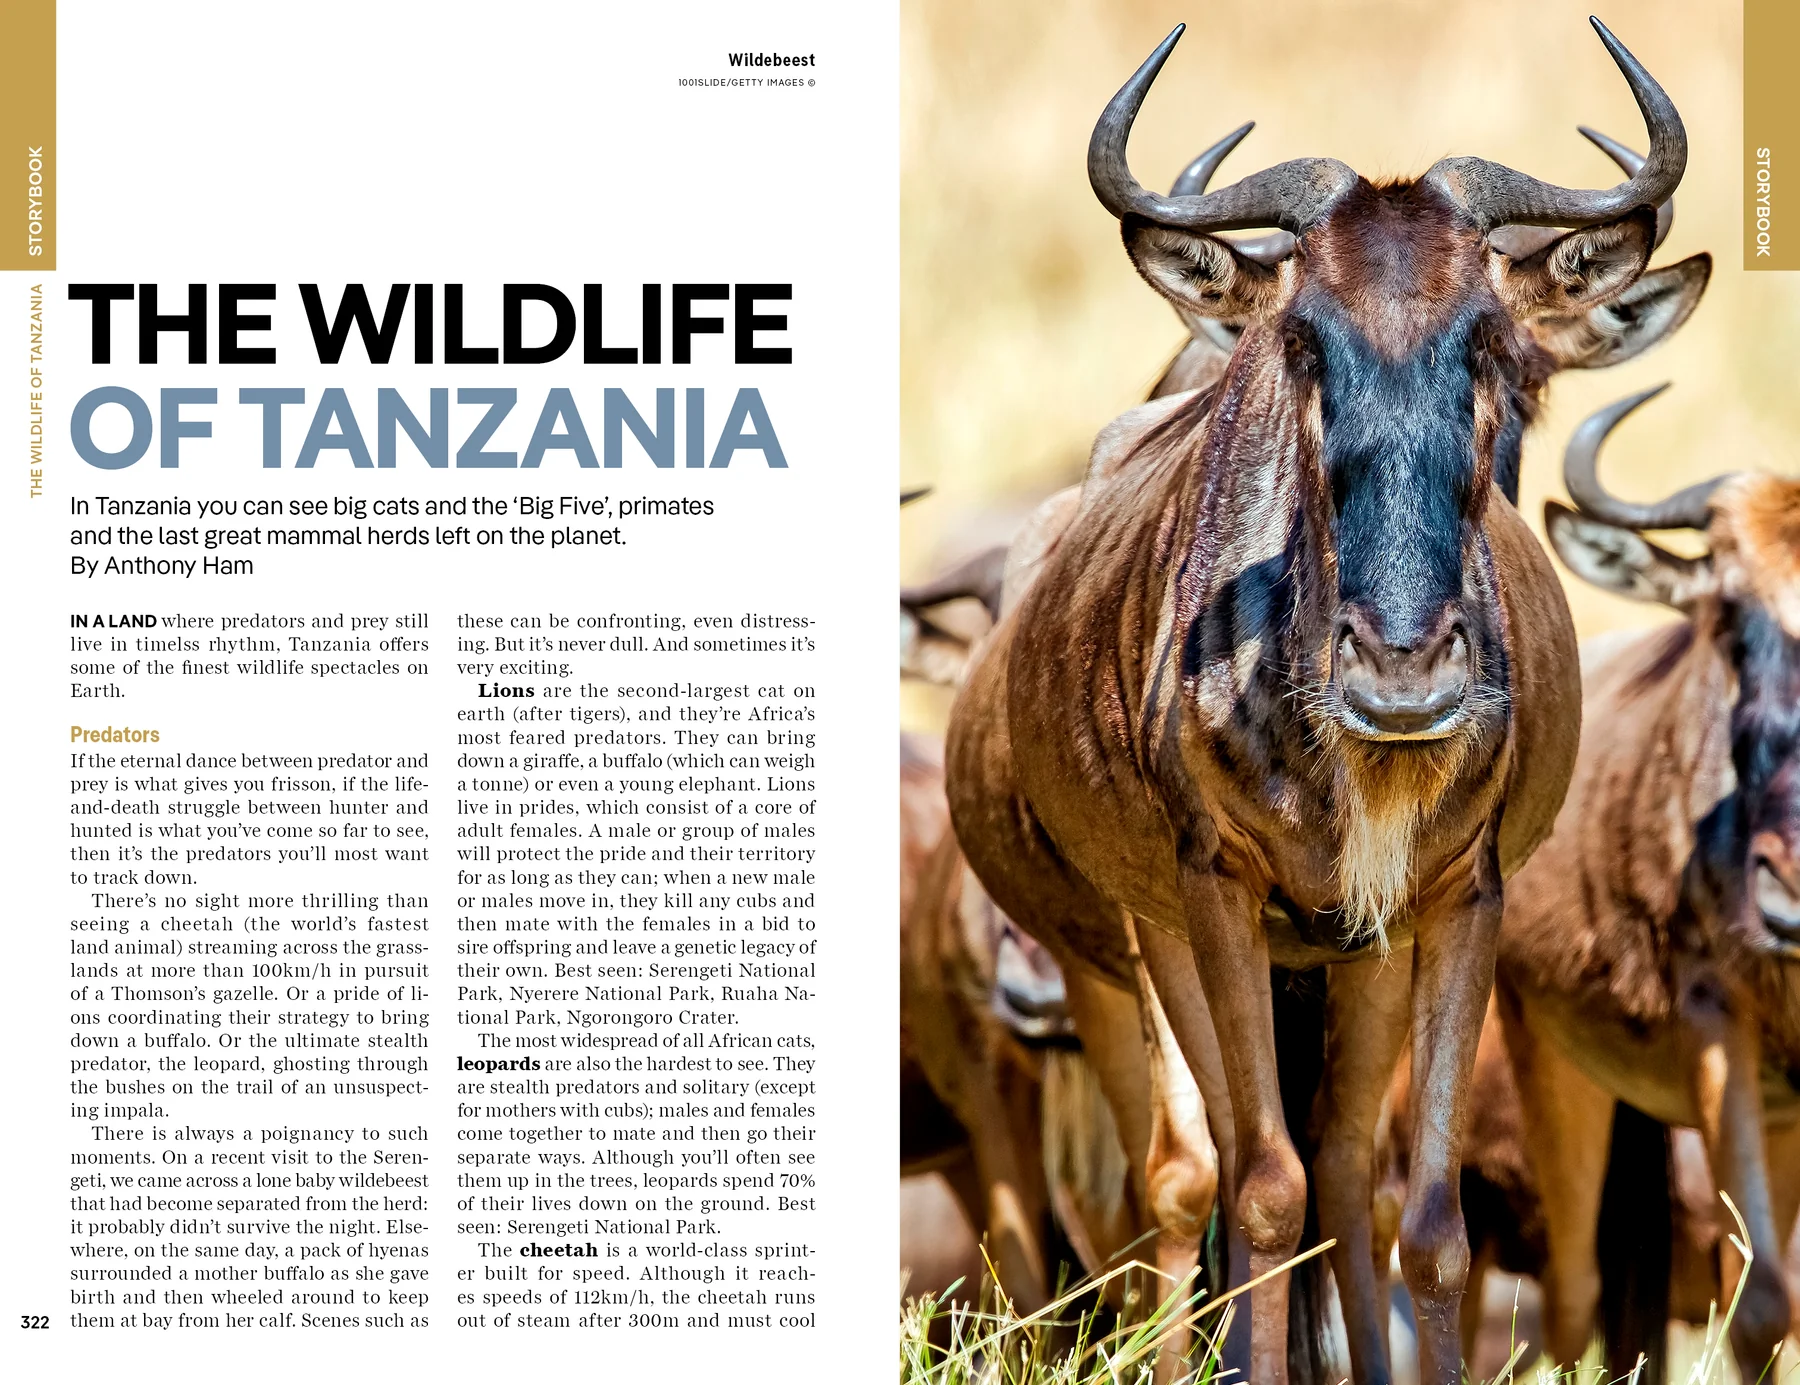 Tanzania Lonely Planet